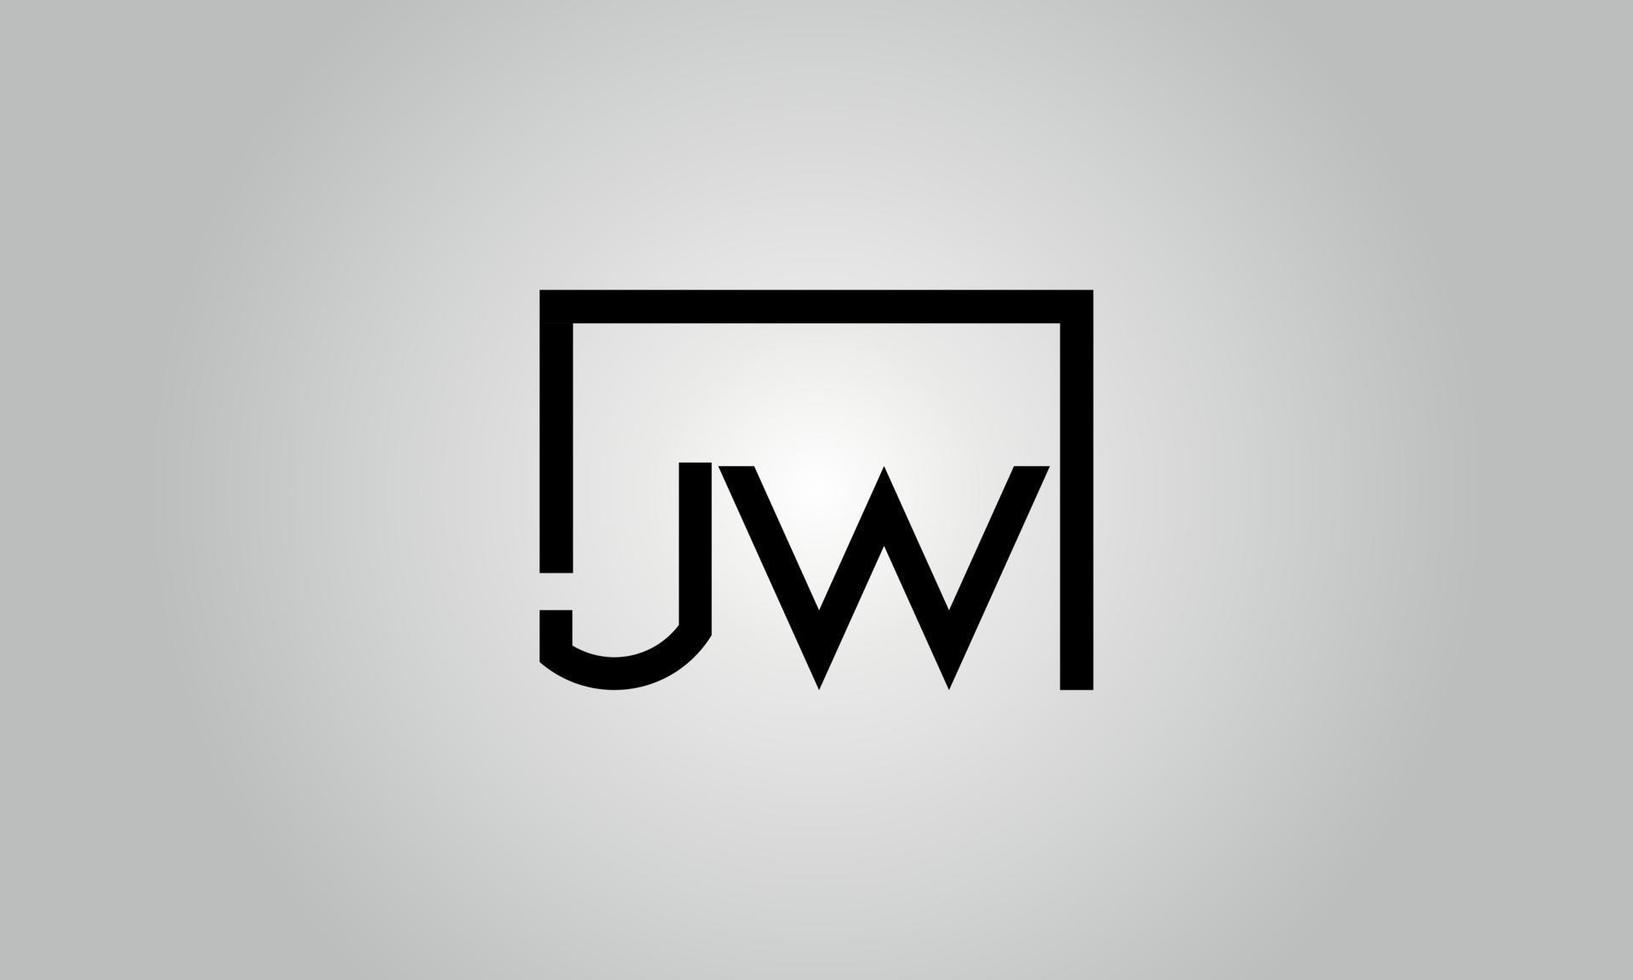 Letter JW logo design. JW logo with square shape in black colors vector free vector template.